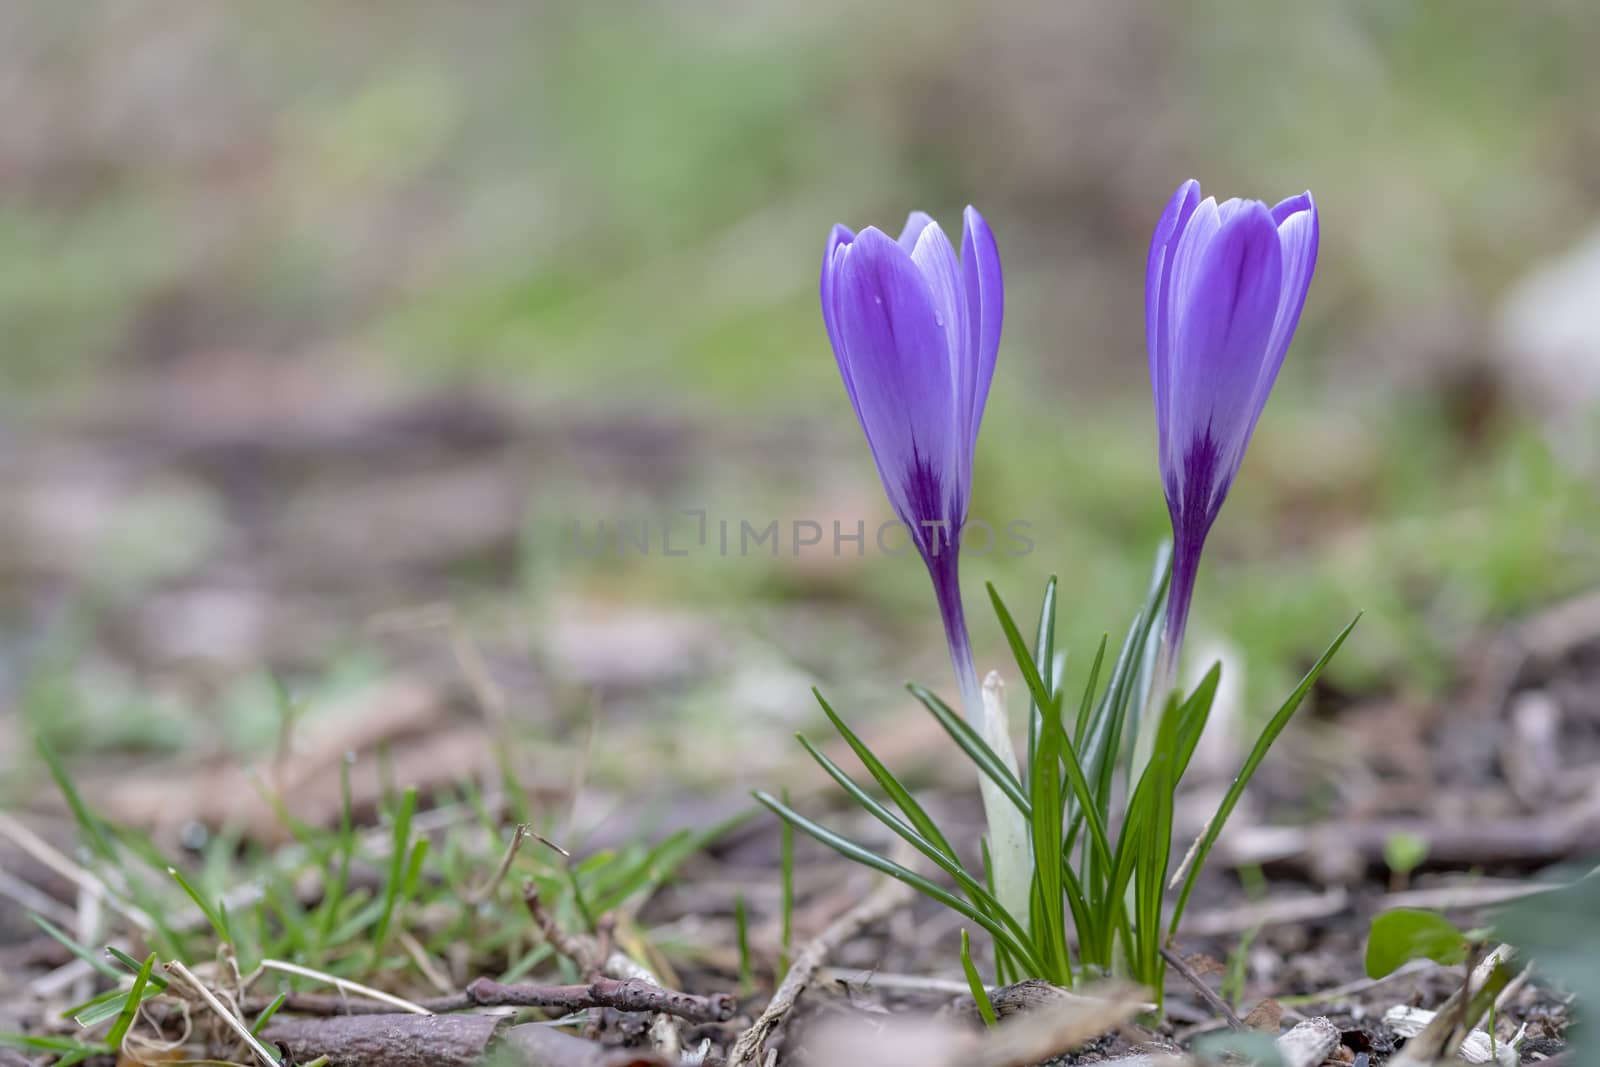 Close up of a purple crocus flower blooming at the early spring against a green grass waiting for bees